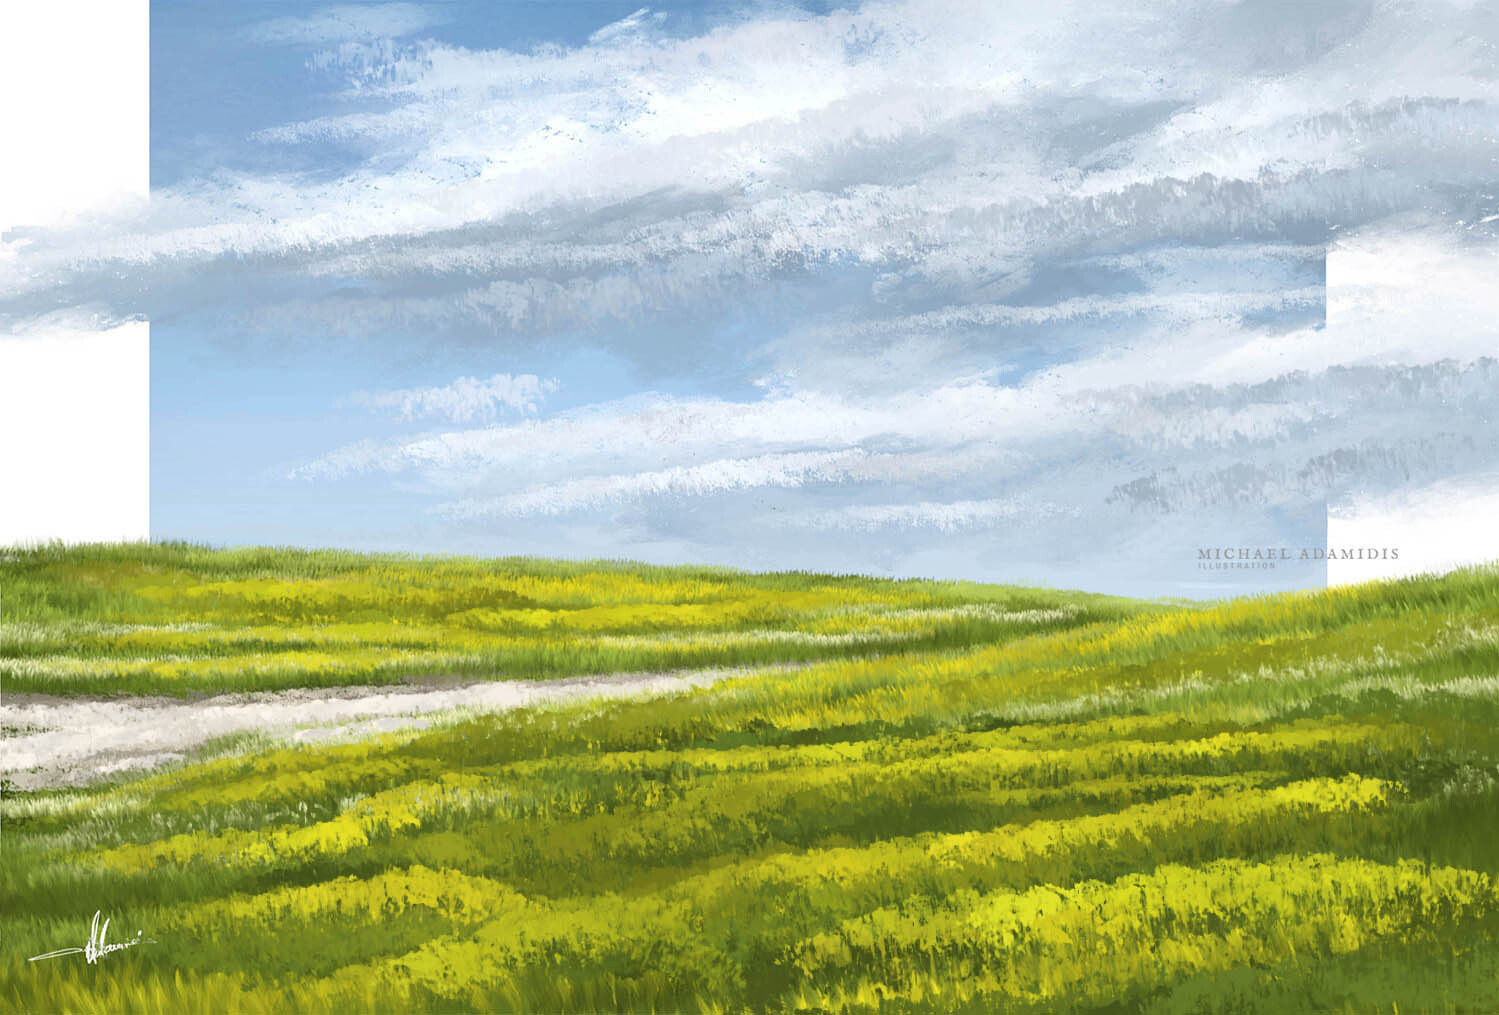 Concept Art Painting - Painterly Style Landscape/Scenery